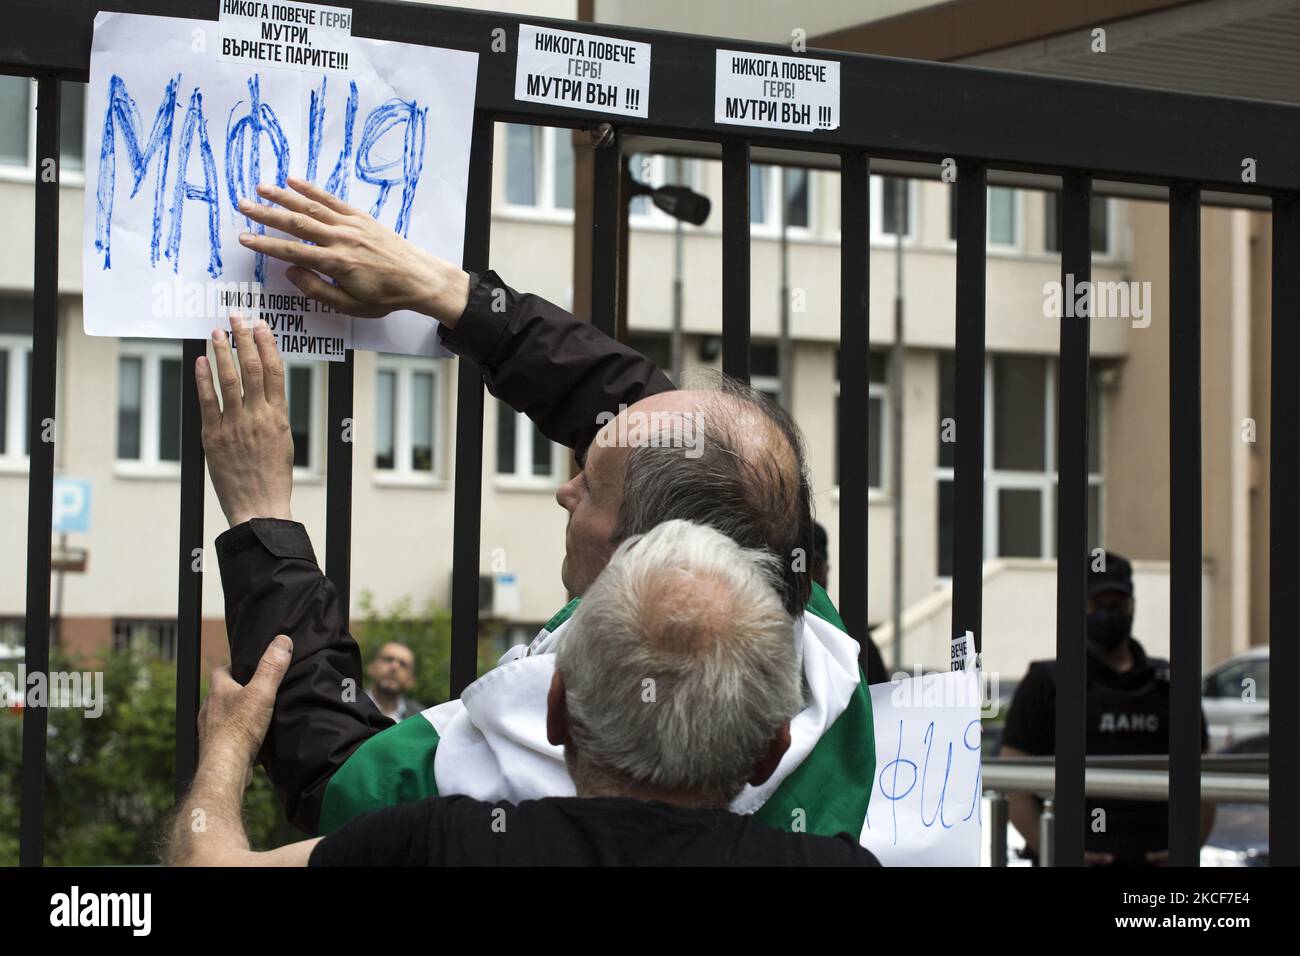 Protest in Sofia, Bulgaria on May 25, 2021 against the illegal wiretapping in front of the SANS (State Agency for National Security) building and blocking a boulevard in front of the building. (Photo by Hristo Vladev/NurPhoto) Stock Photo